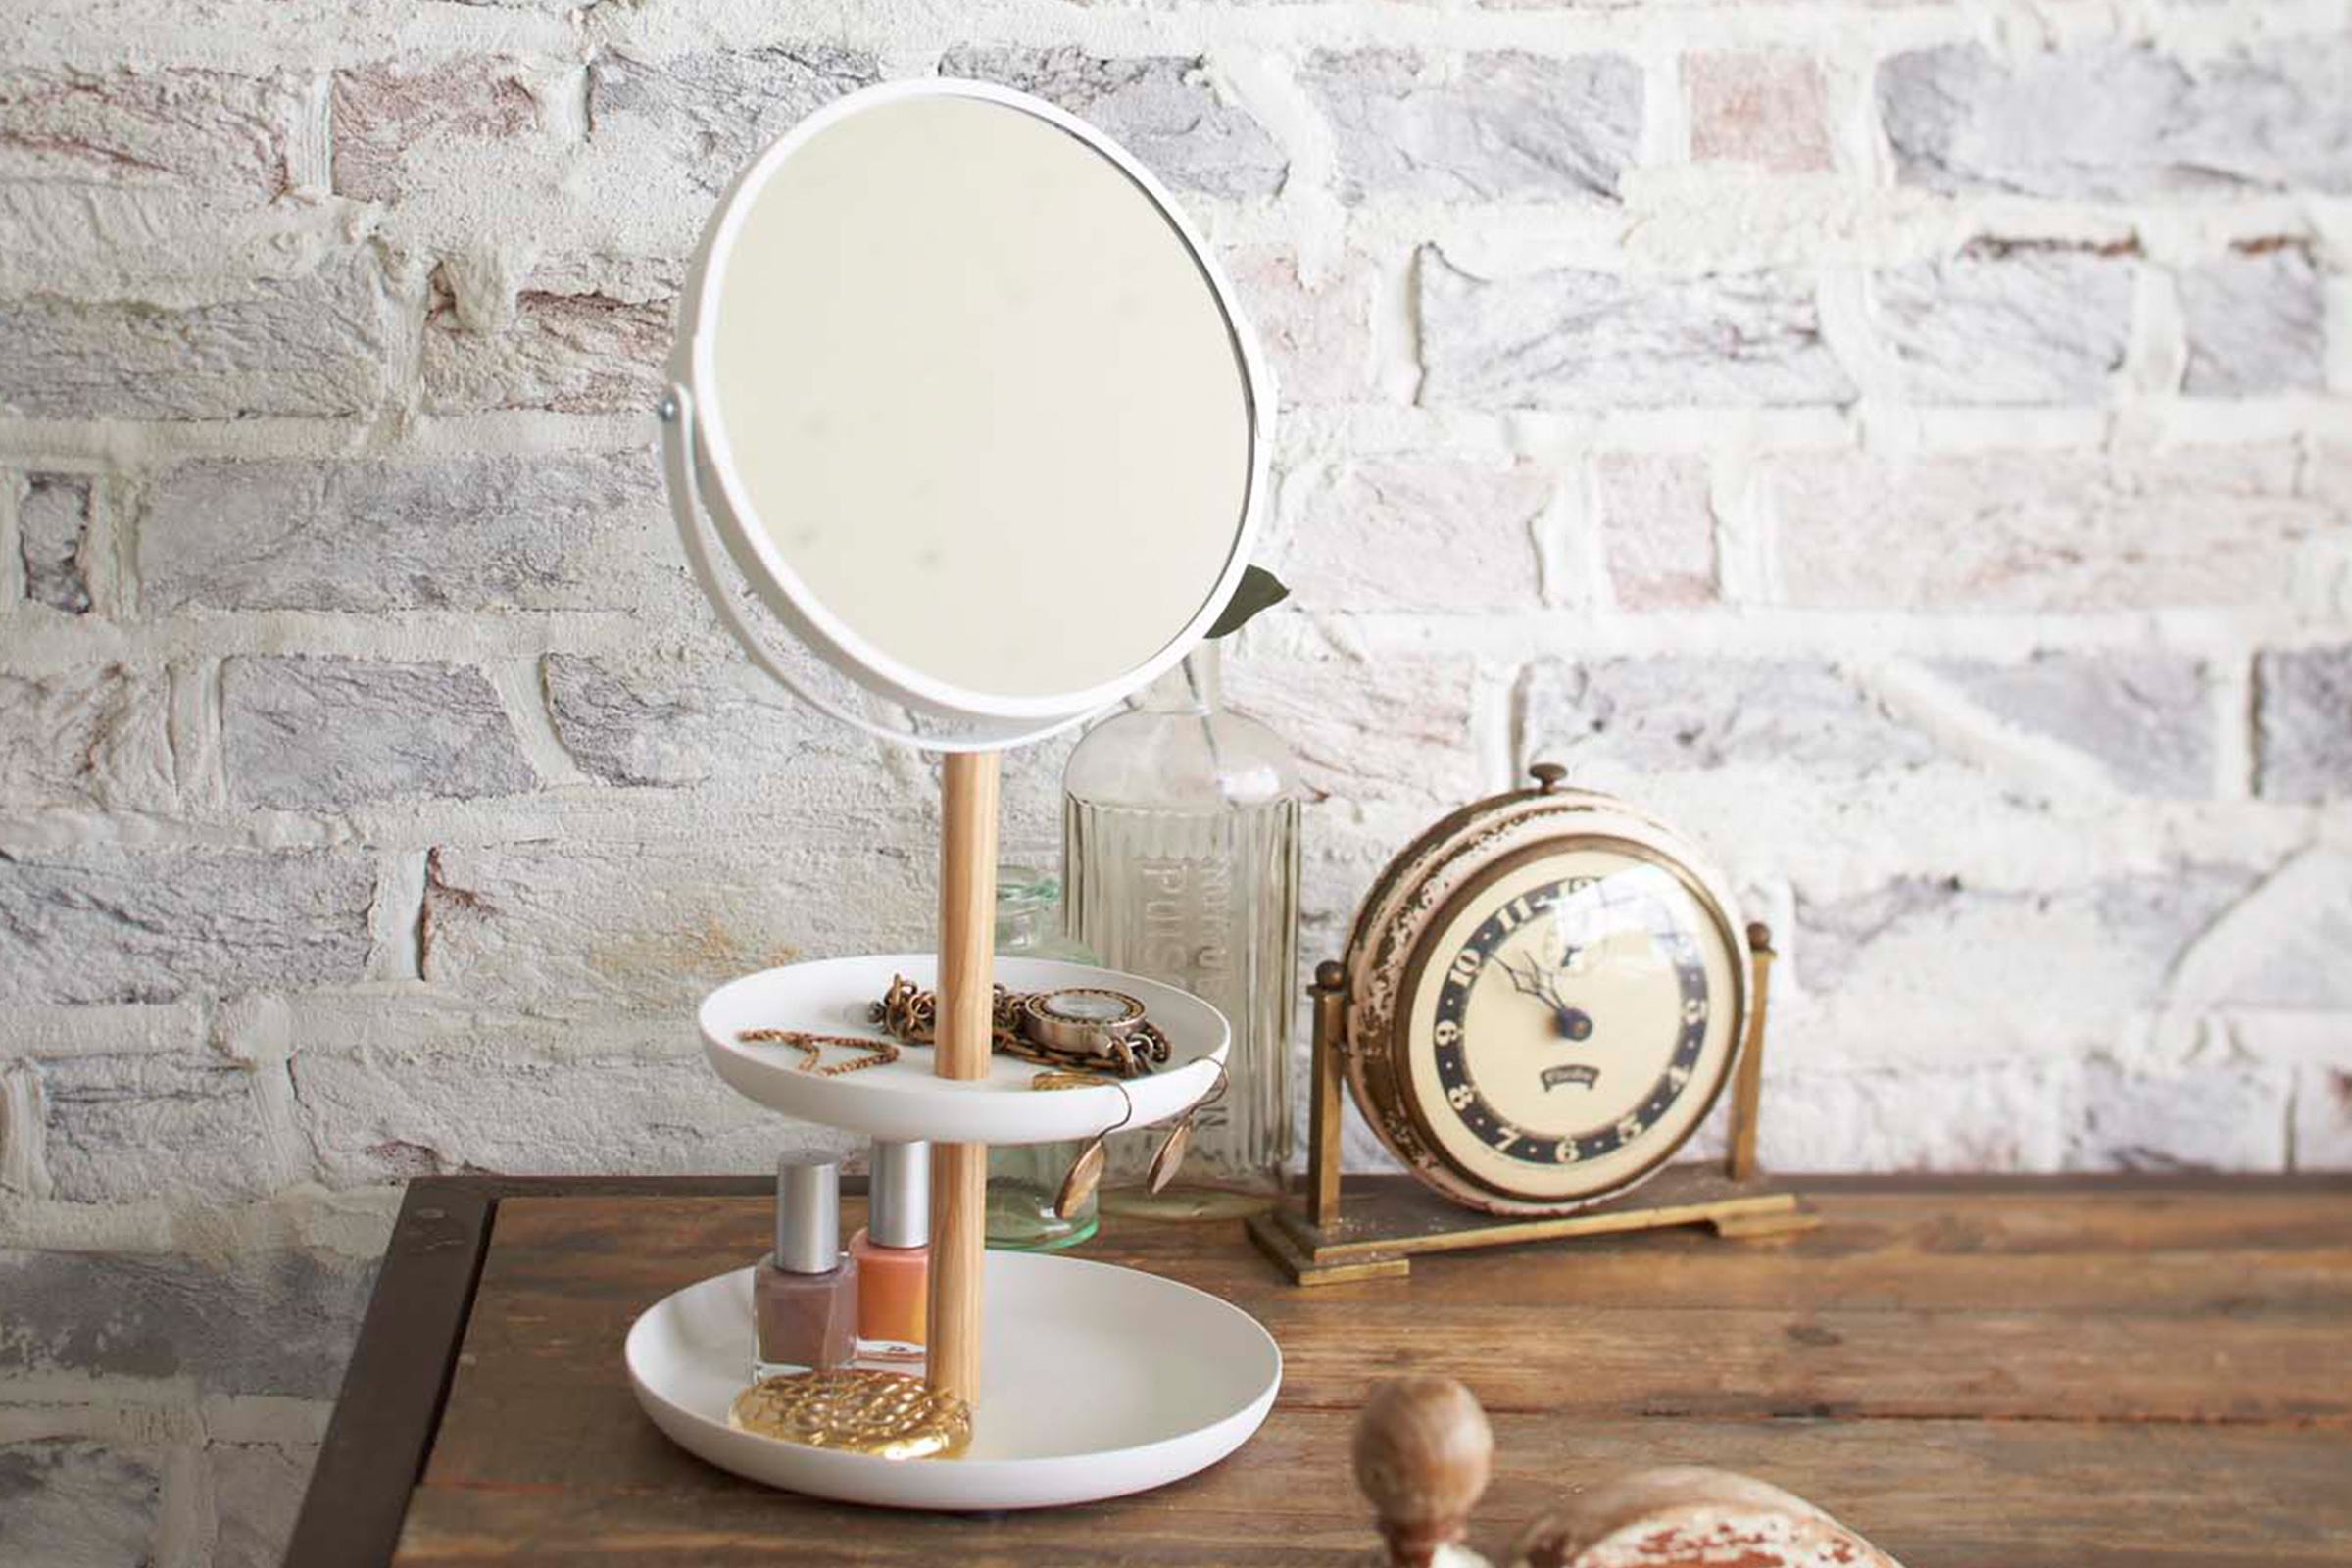 Yamazaki's Tabletop round mirror with tiered trays holding accessories on a dresser.